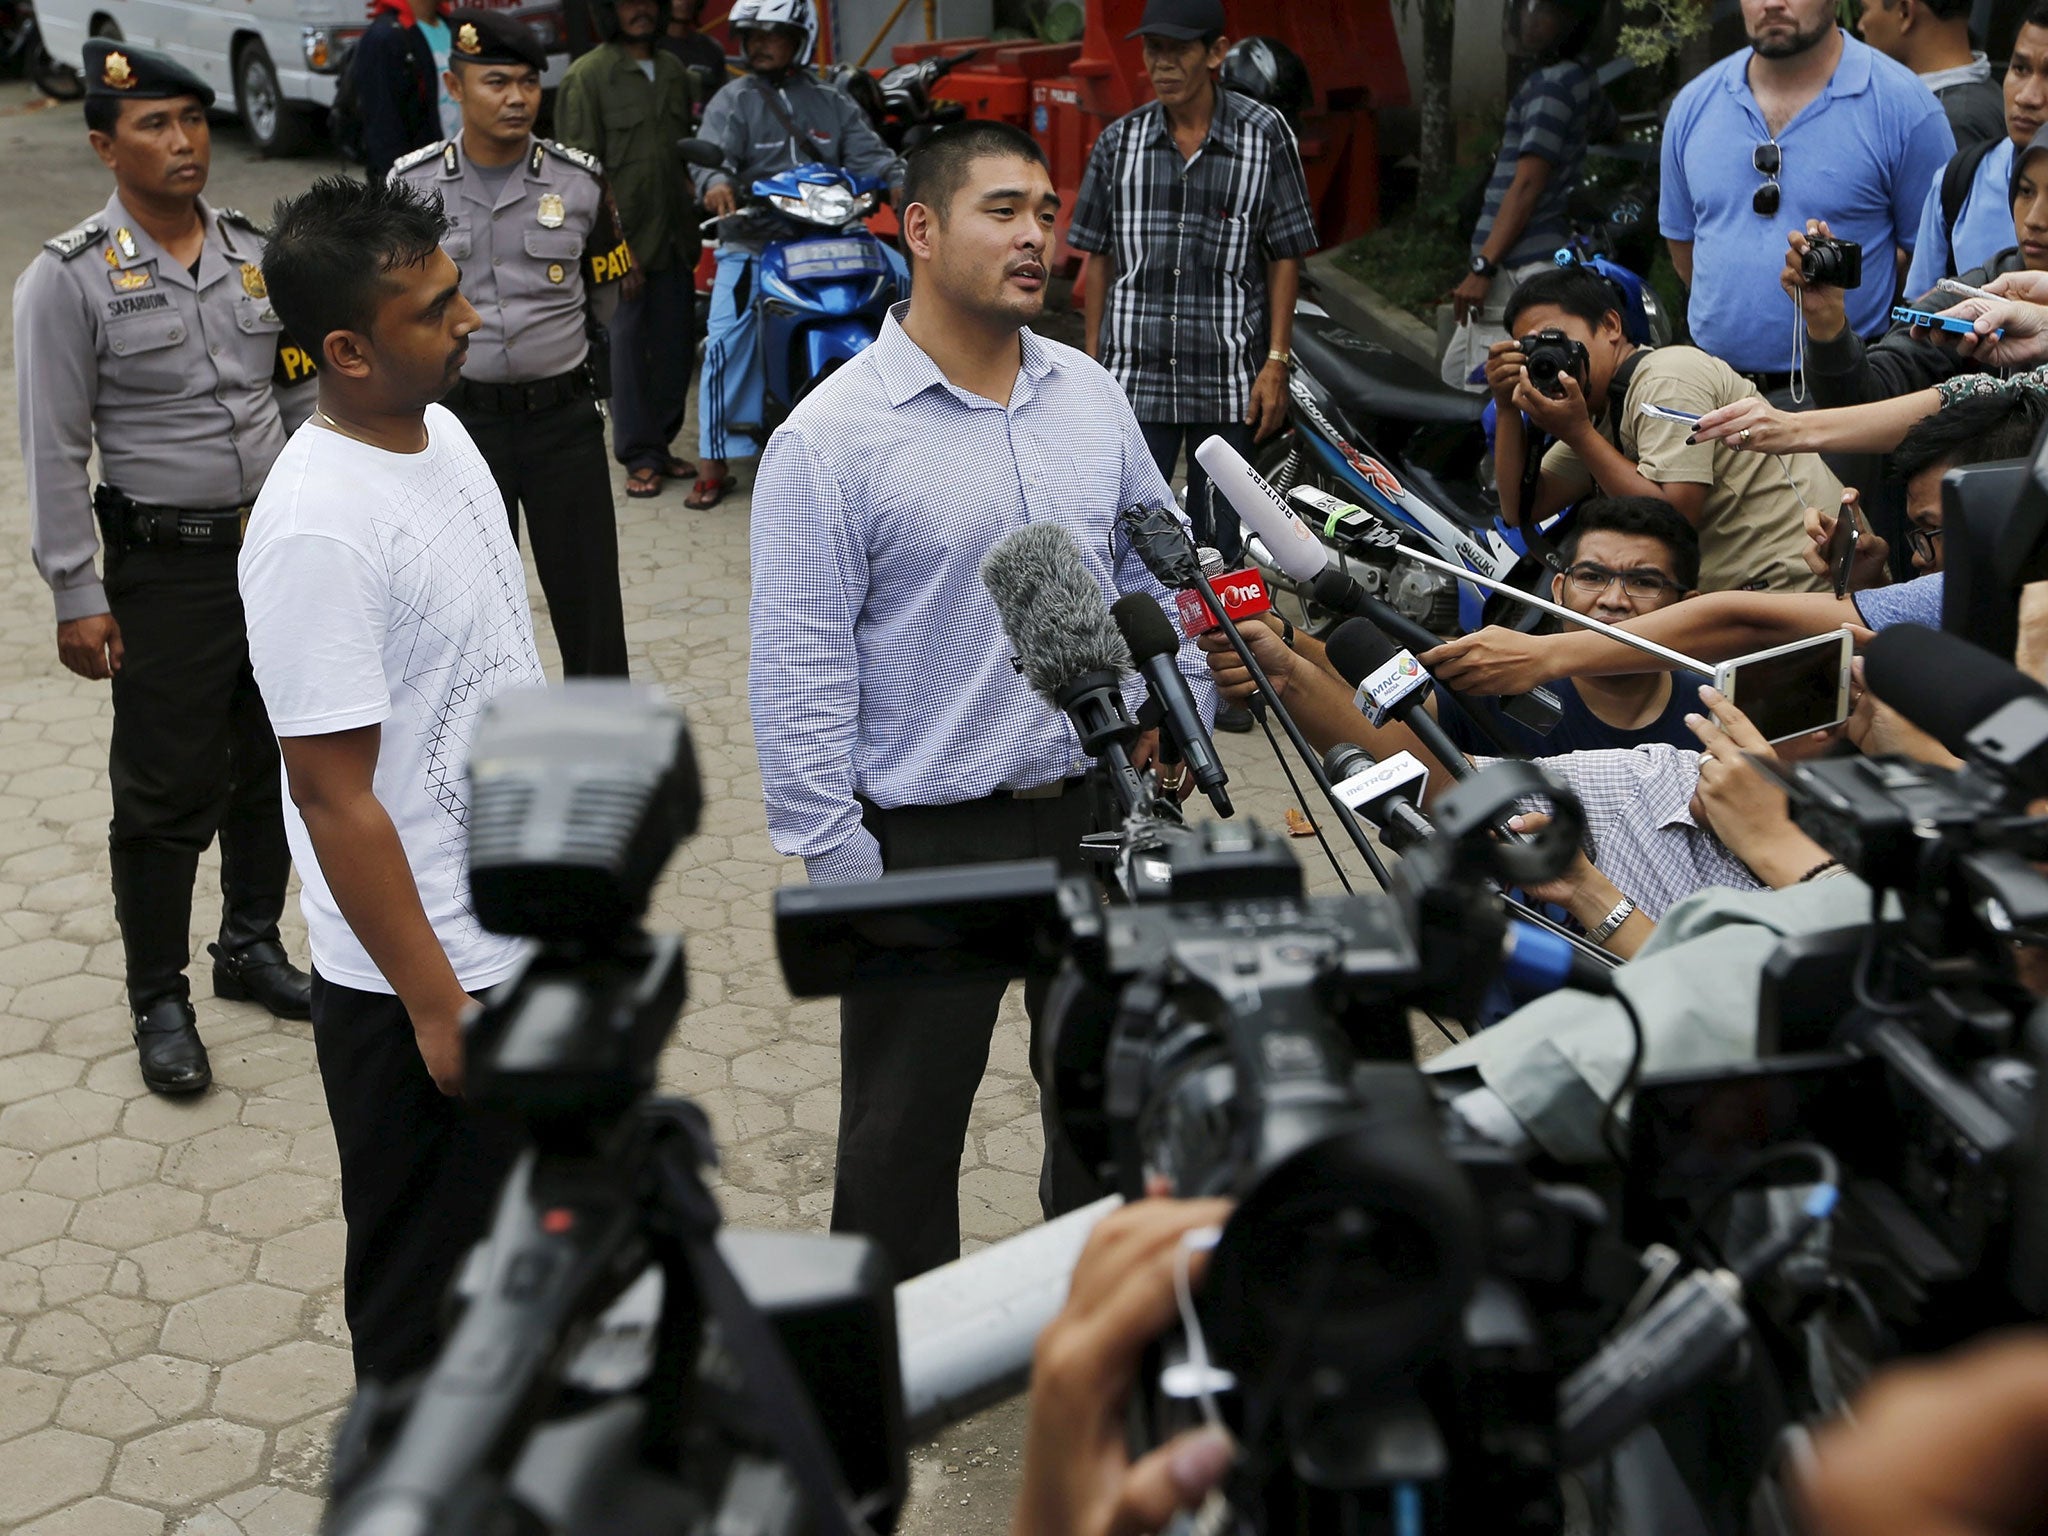 Chintu Sukumaran (L), brother of Myuran Sukumaran, stands next to Michael Chan, brother of Andrew Chan in Indonesia on 26 April, 2015